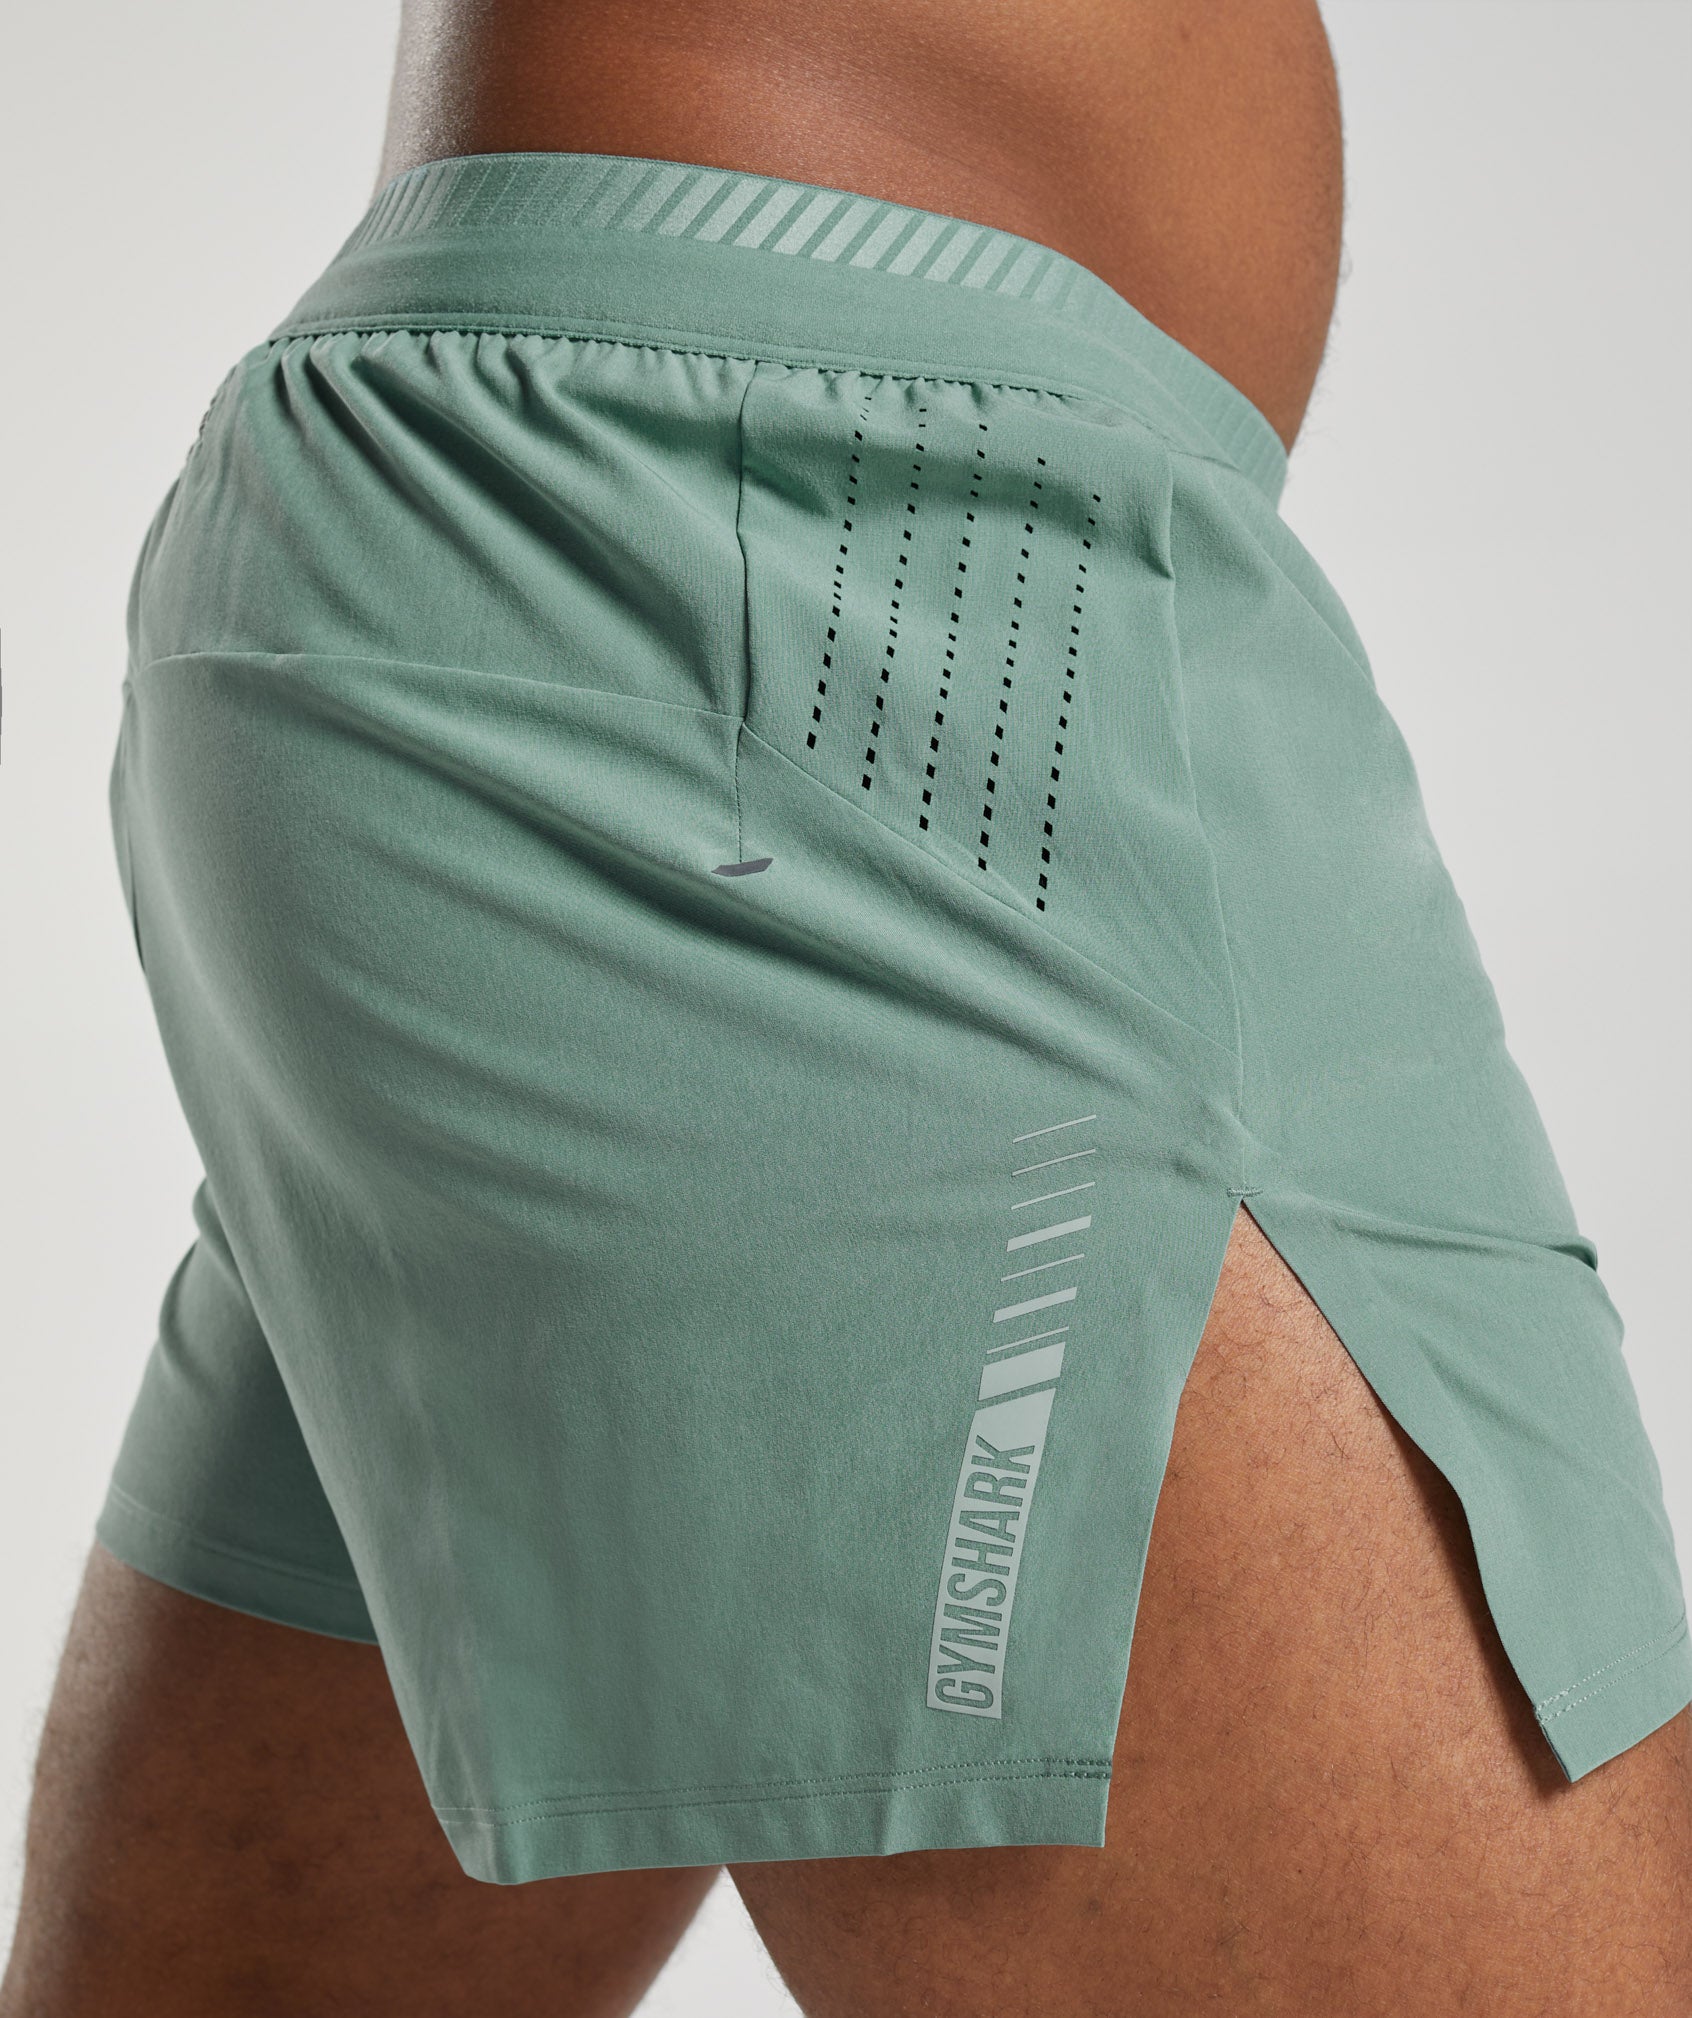 Apex Run 4" Shorts in Ink Teal - view 5